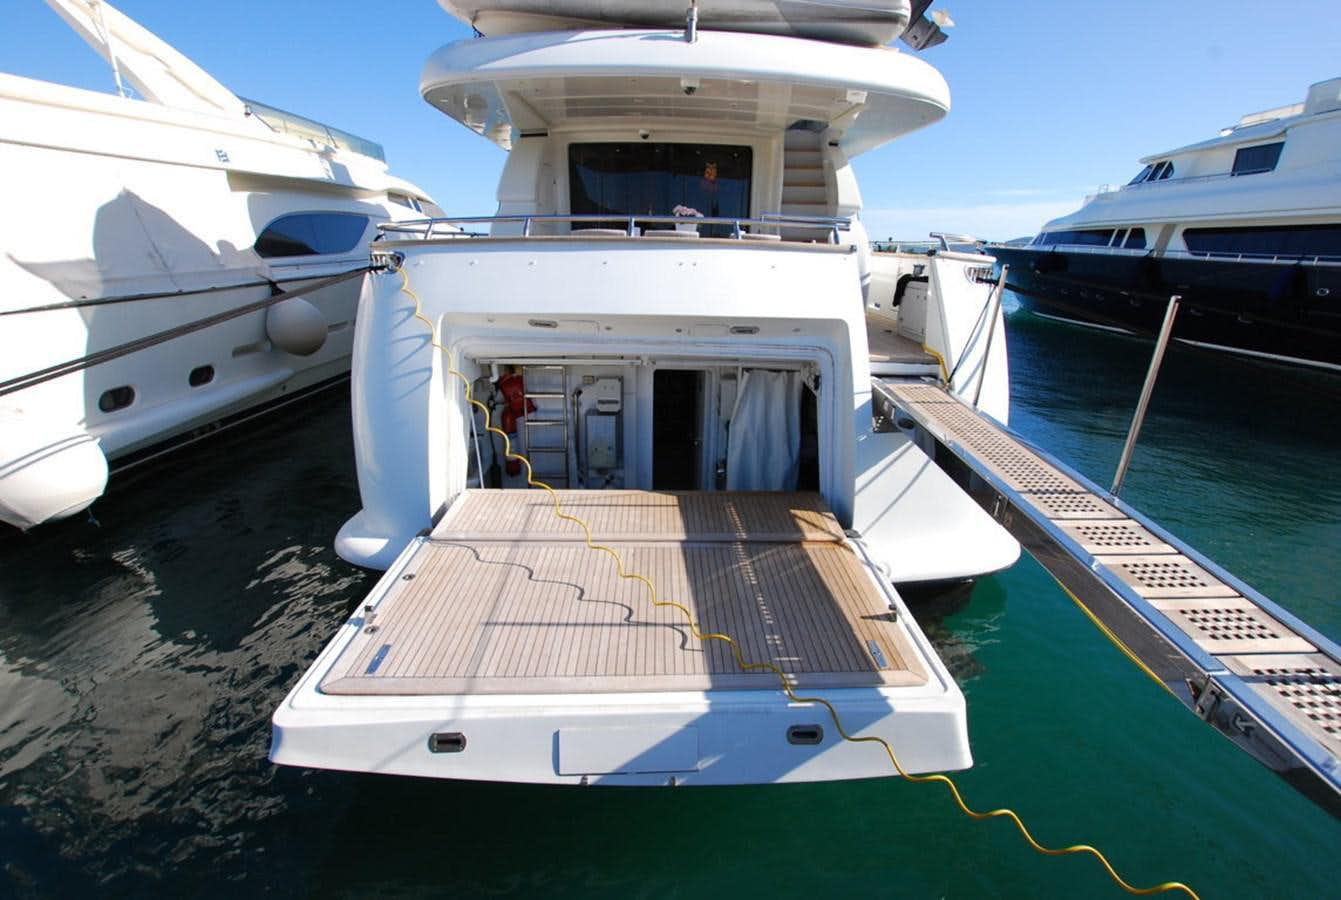 Cookie
Yacht for Sale